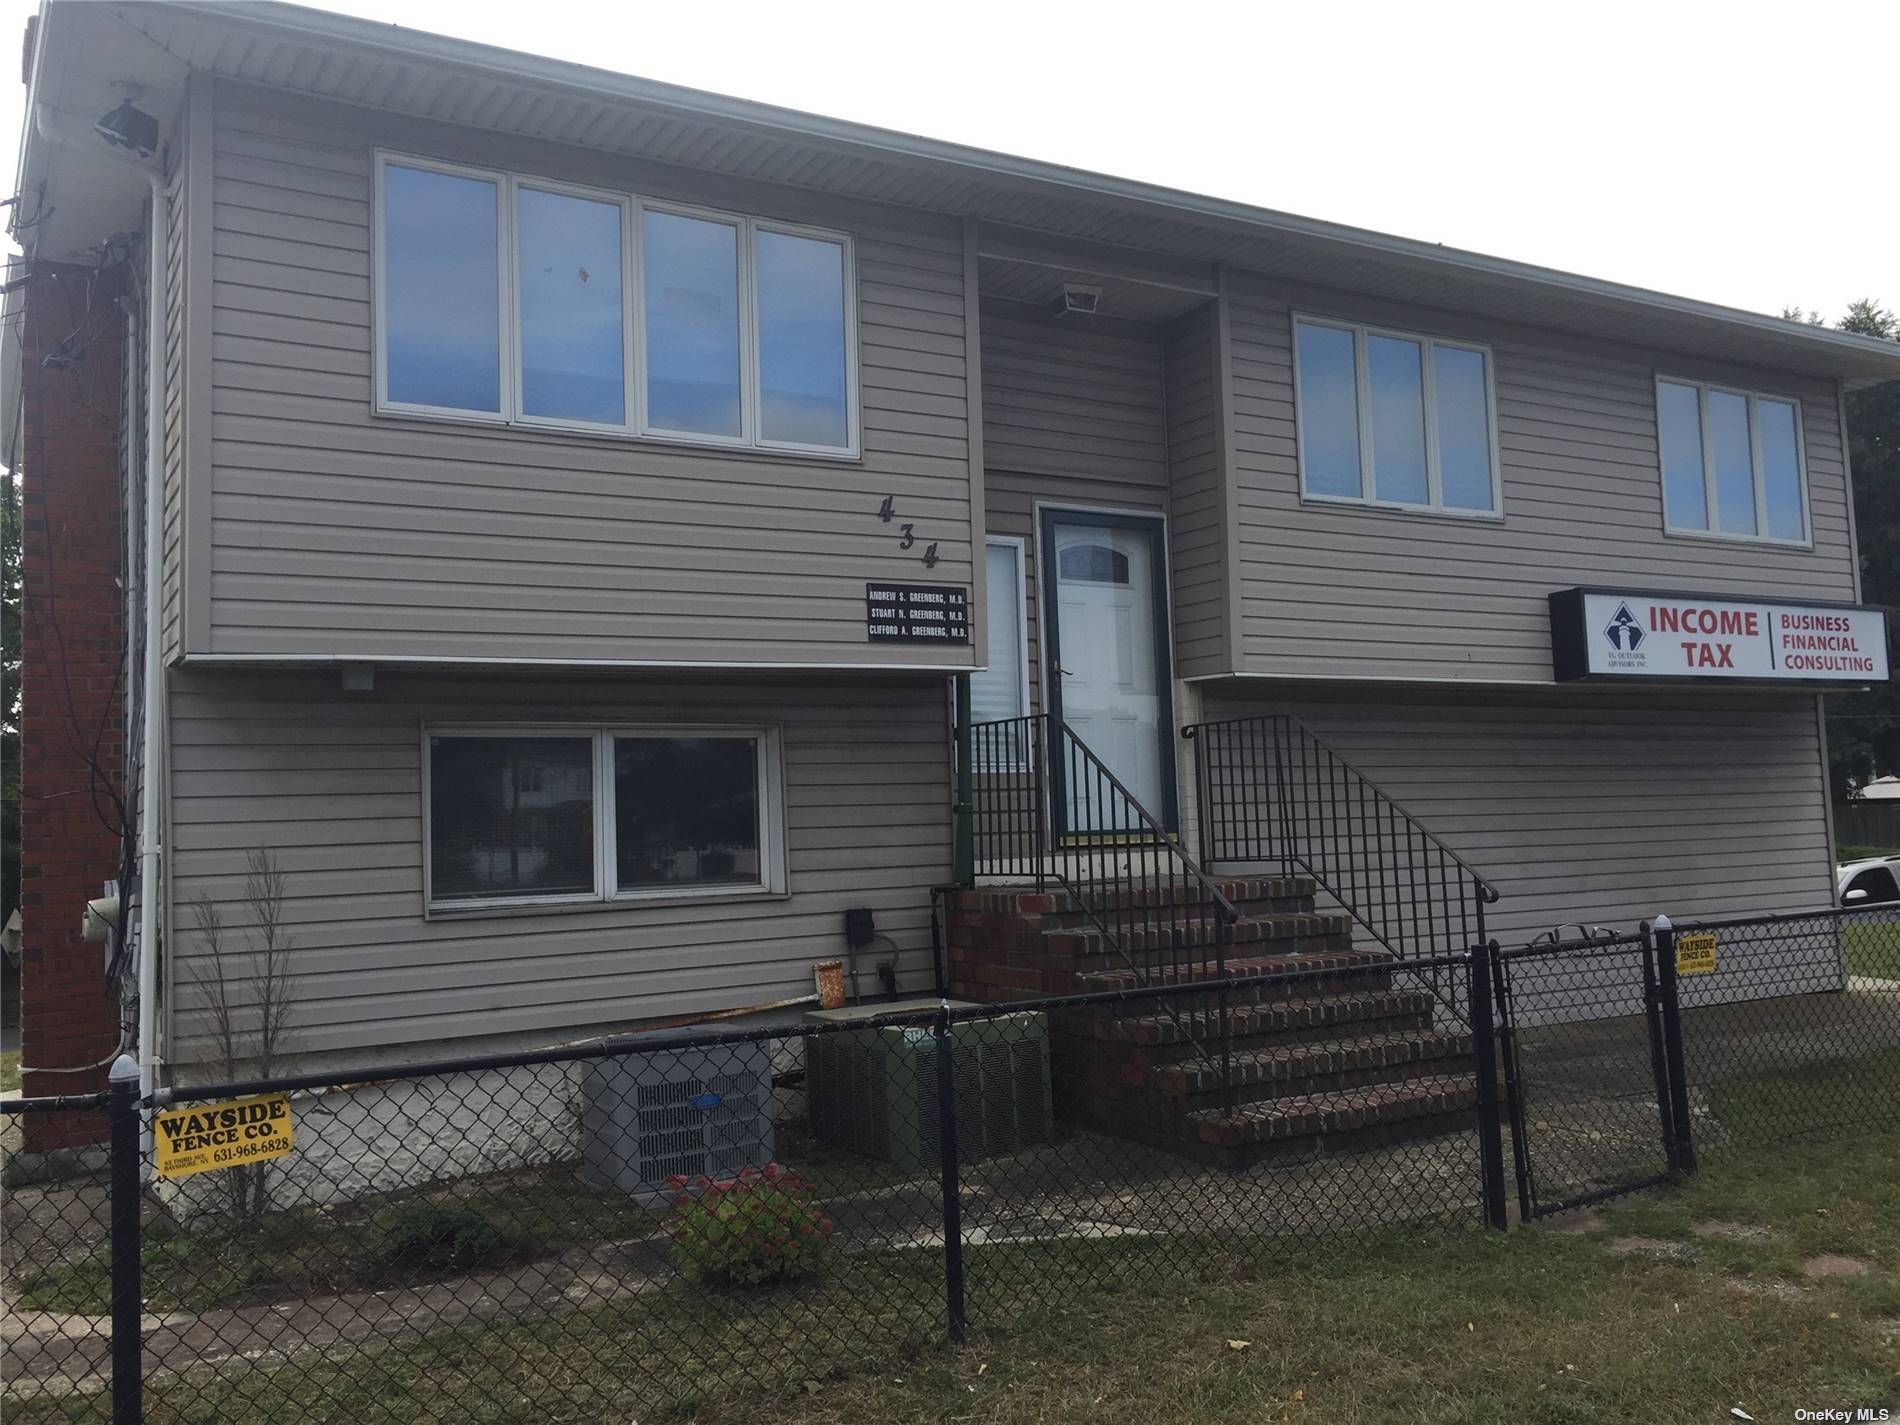 This free standing building situated with high visibility in prestigious West Islip is ideal for doctors office, accountant, financial advisor etc.